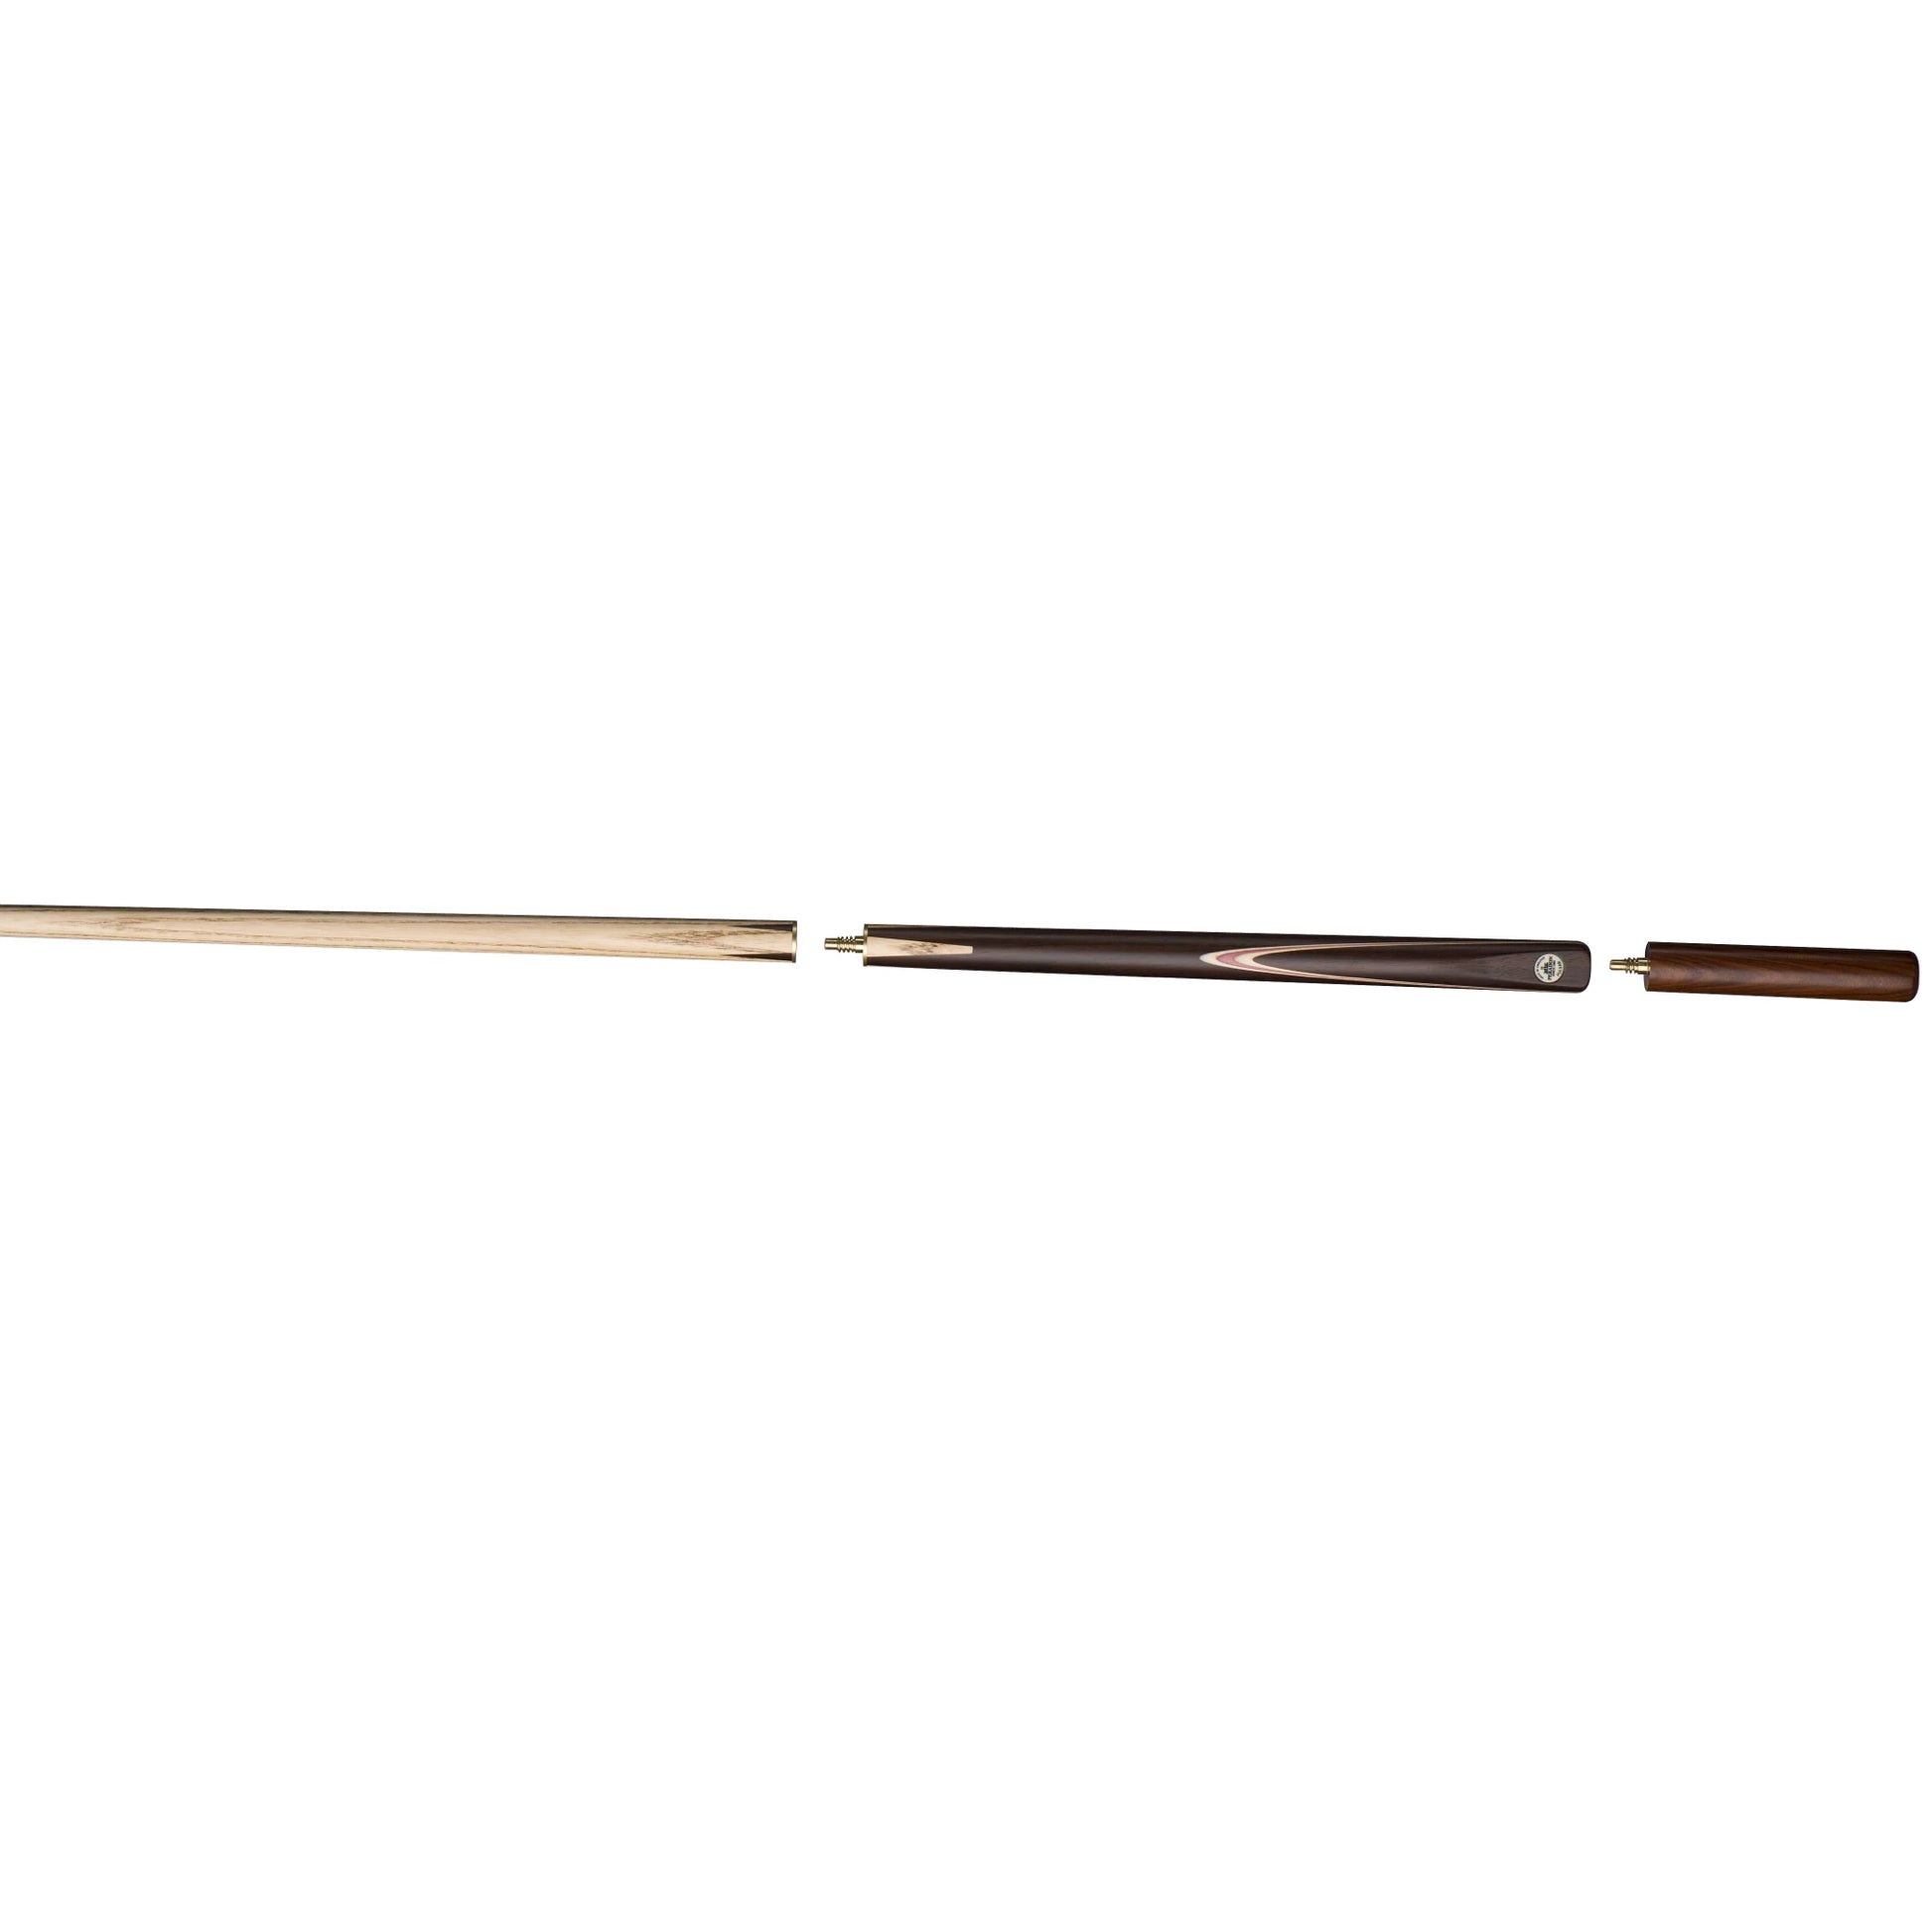 Peradon Pulsar ¾ Jointed 8 Ball Pool Cue with Mini Butt